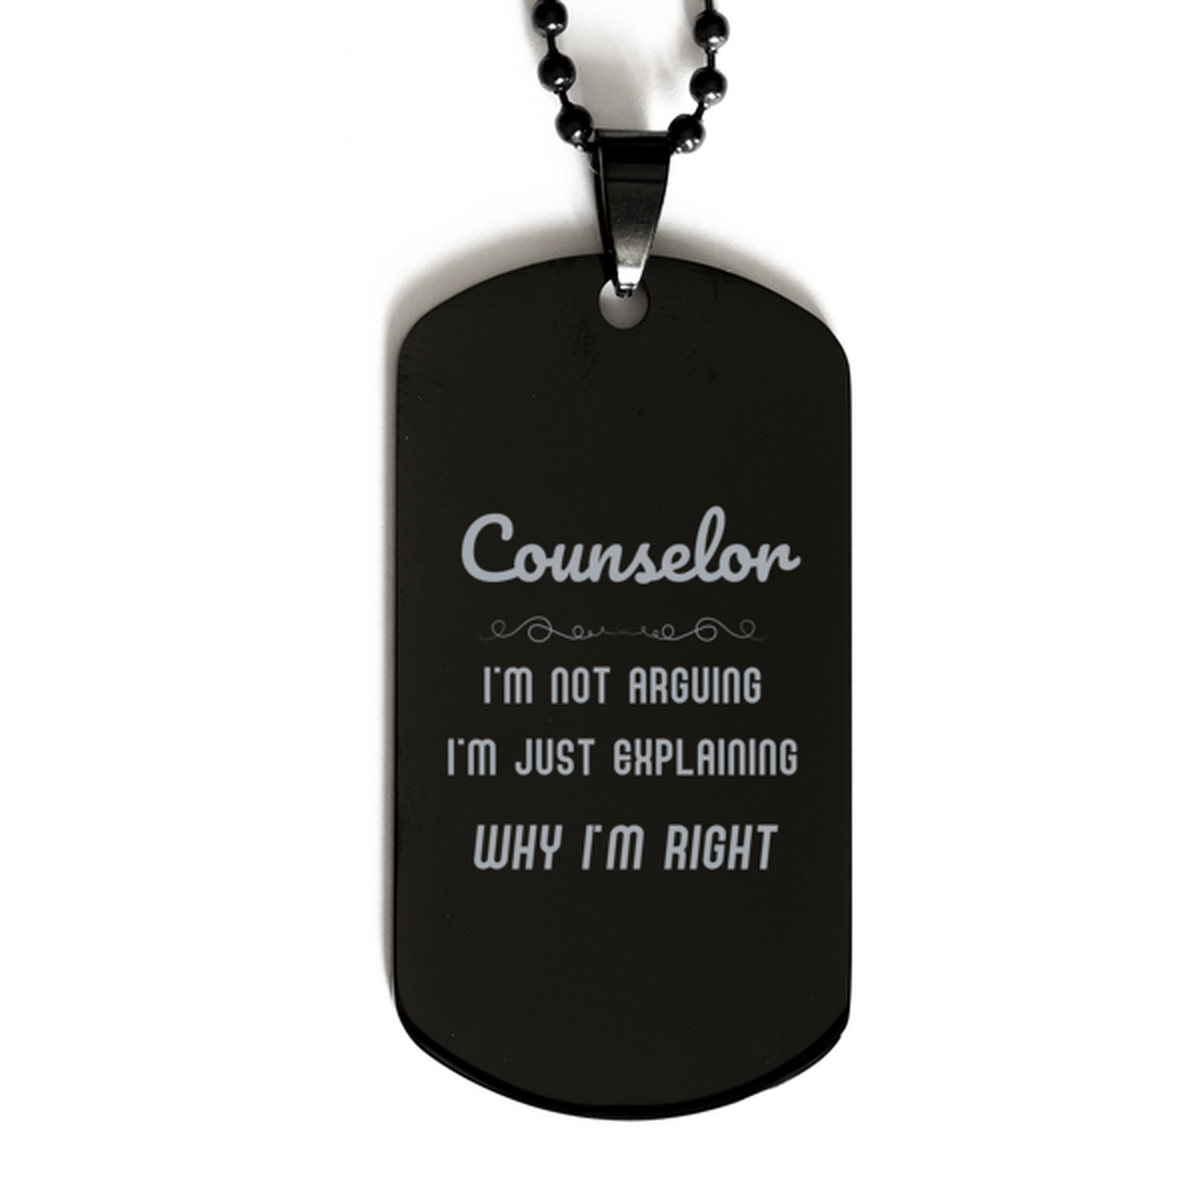 Counselor I'm not Arguing. I'm Just Explaining Why I'm RIGHT Black Dog Tag, Funny Saying Quote Counselor Gifts For Counselor Graduation Birthday Christmas Gifts for Men Women Coworker